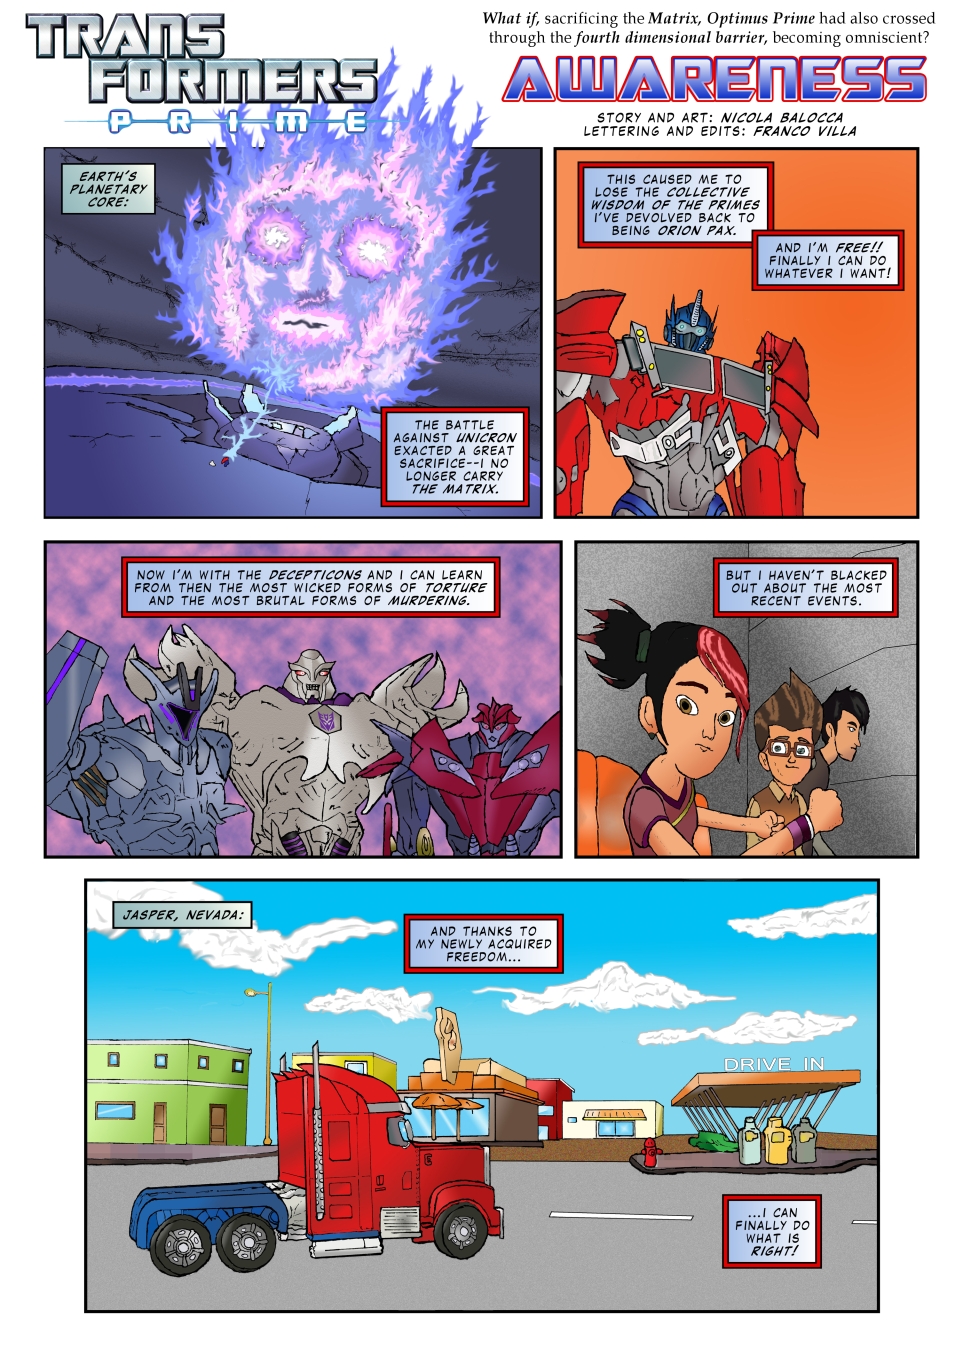 Transformers Adult Fanfiction 90